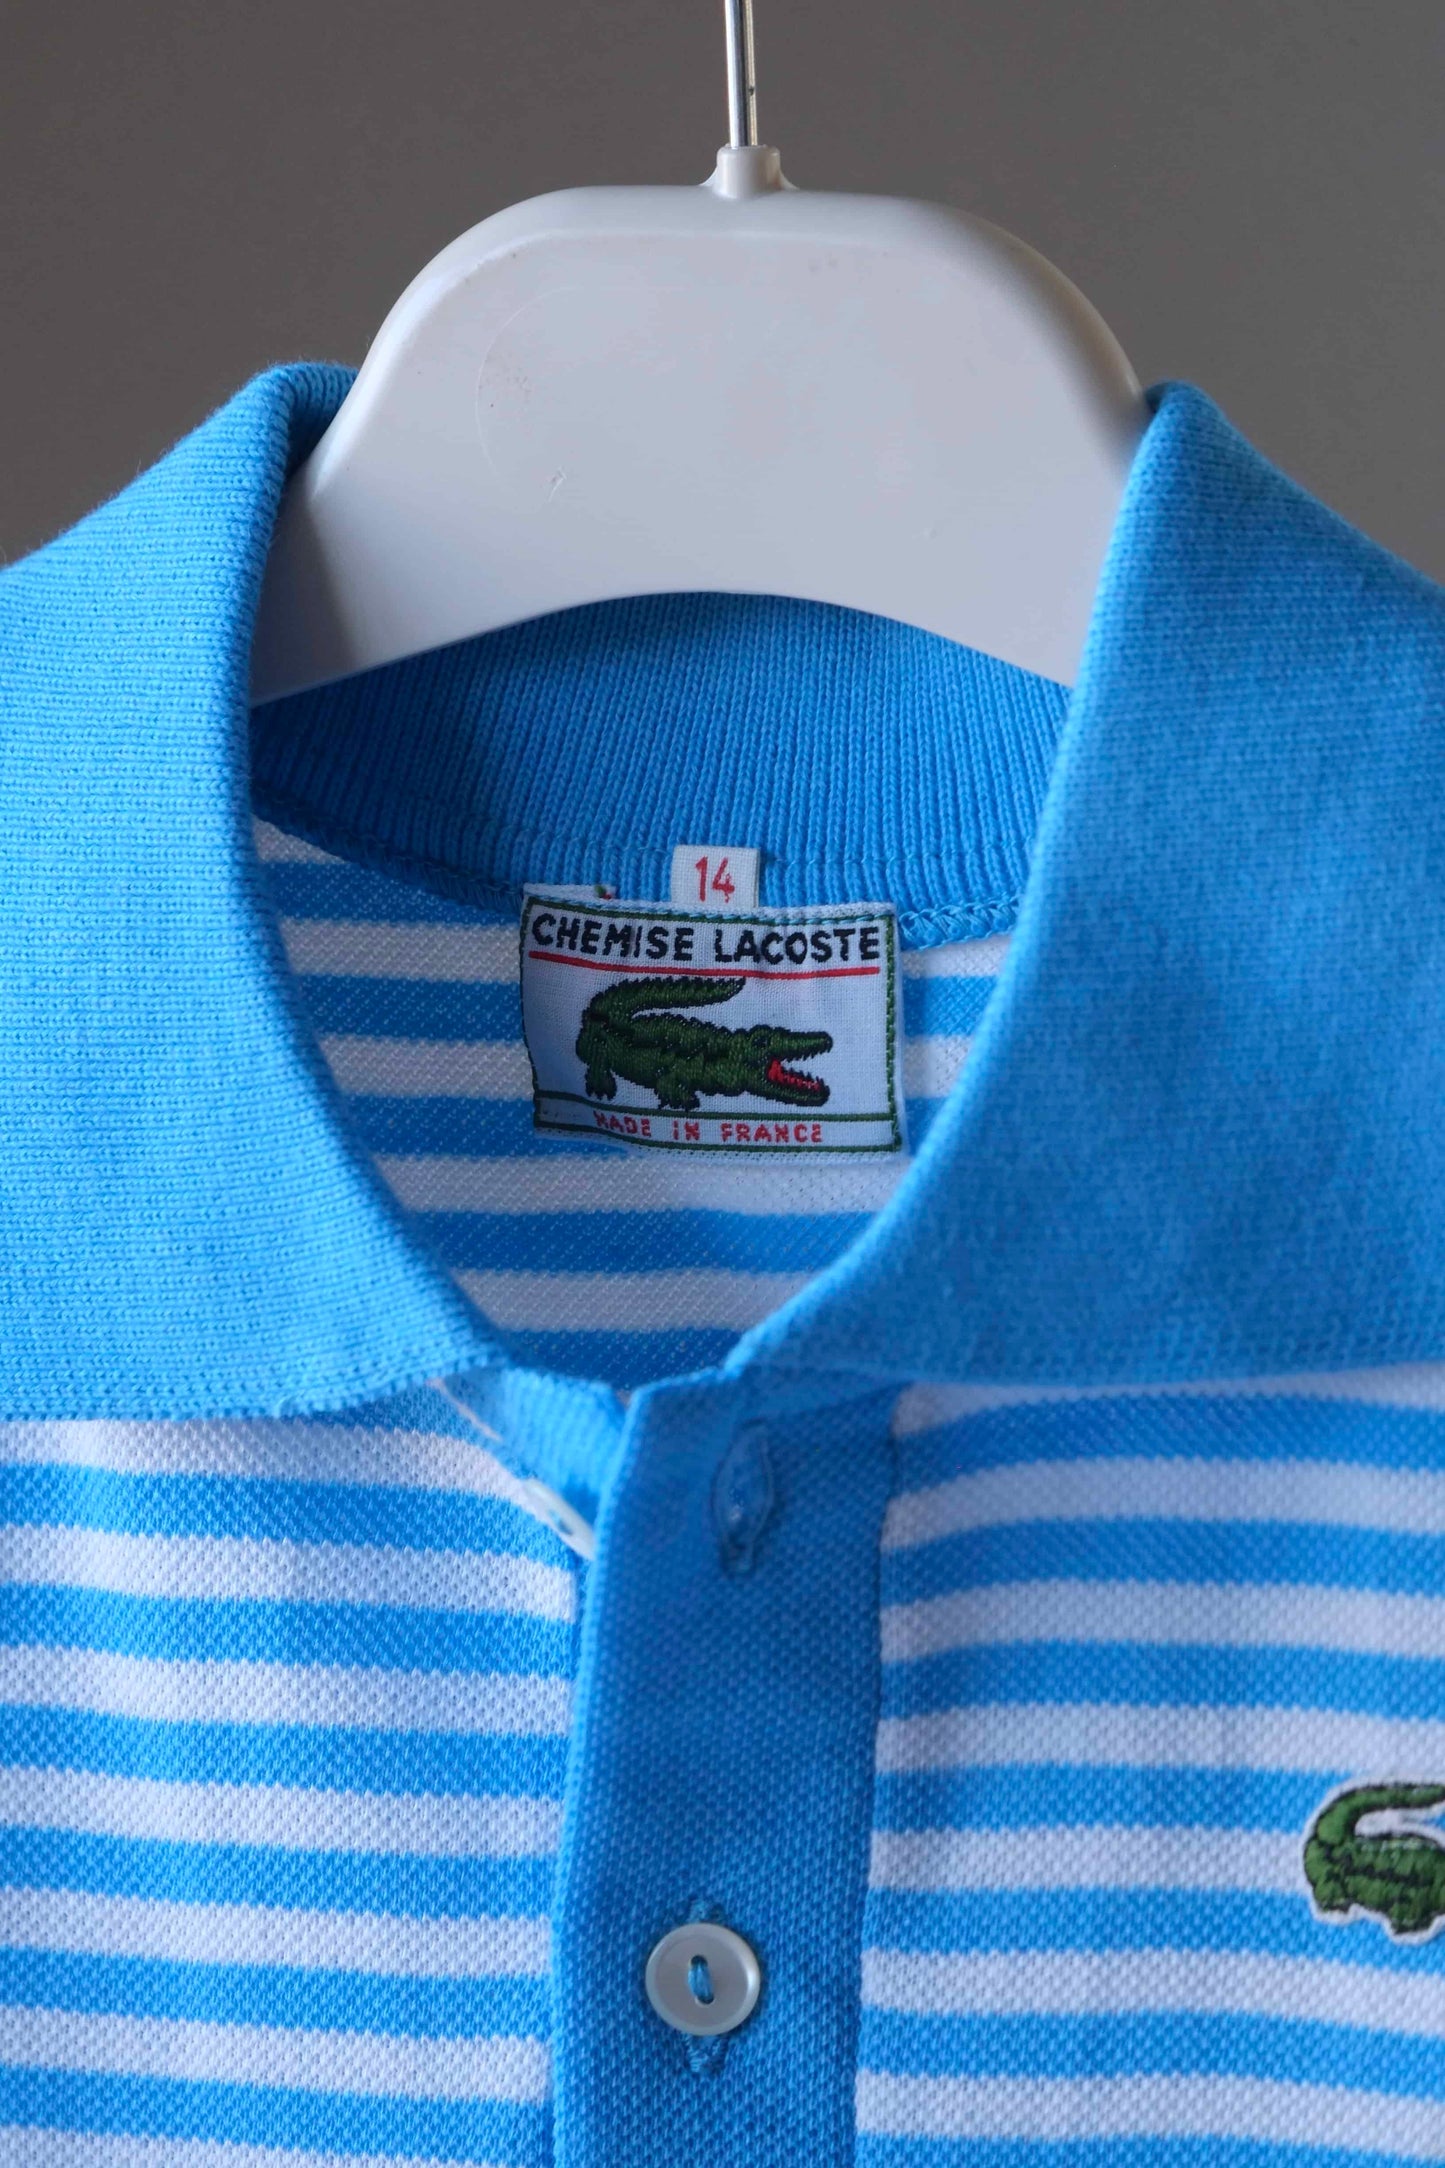 LACOSTE Kids Polo in white and bright blue stripes close up of tag